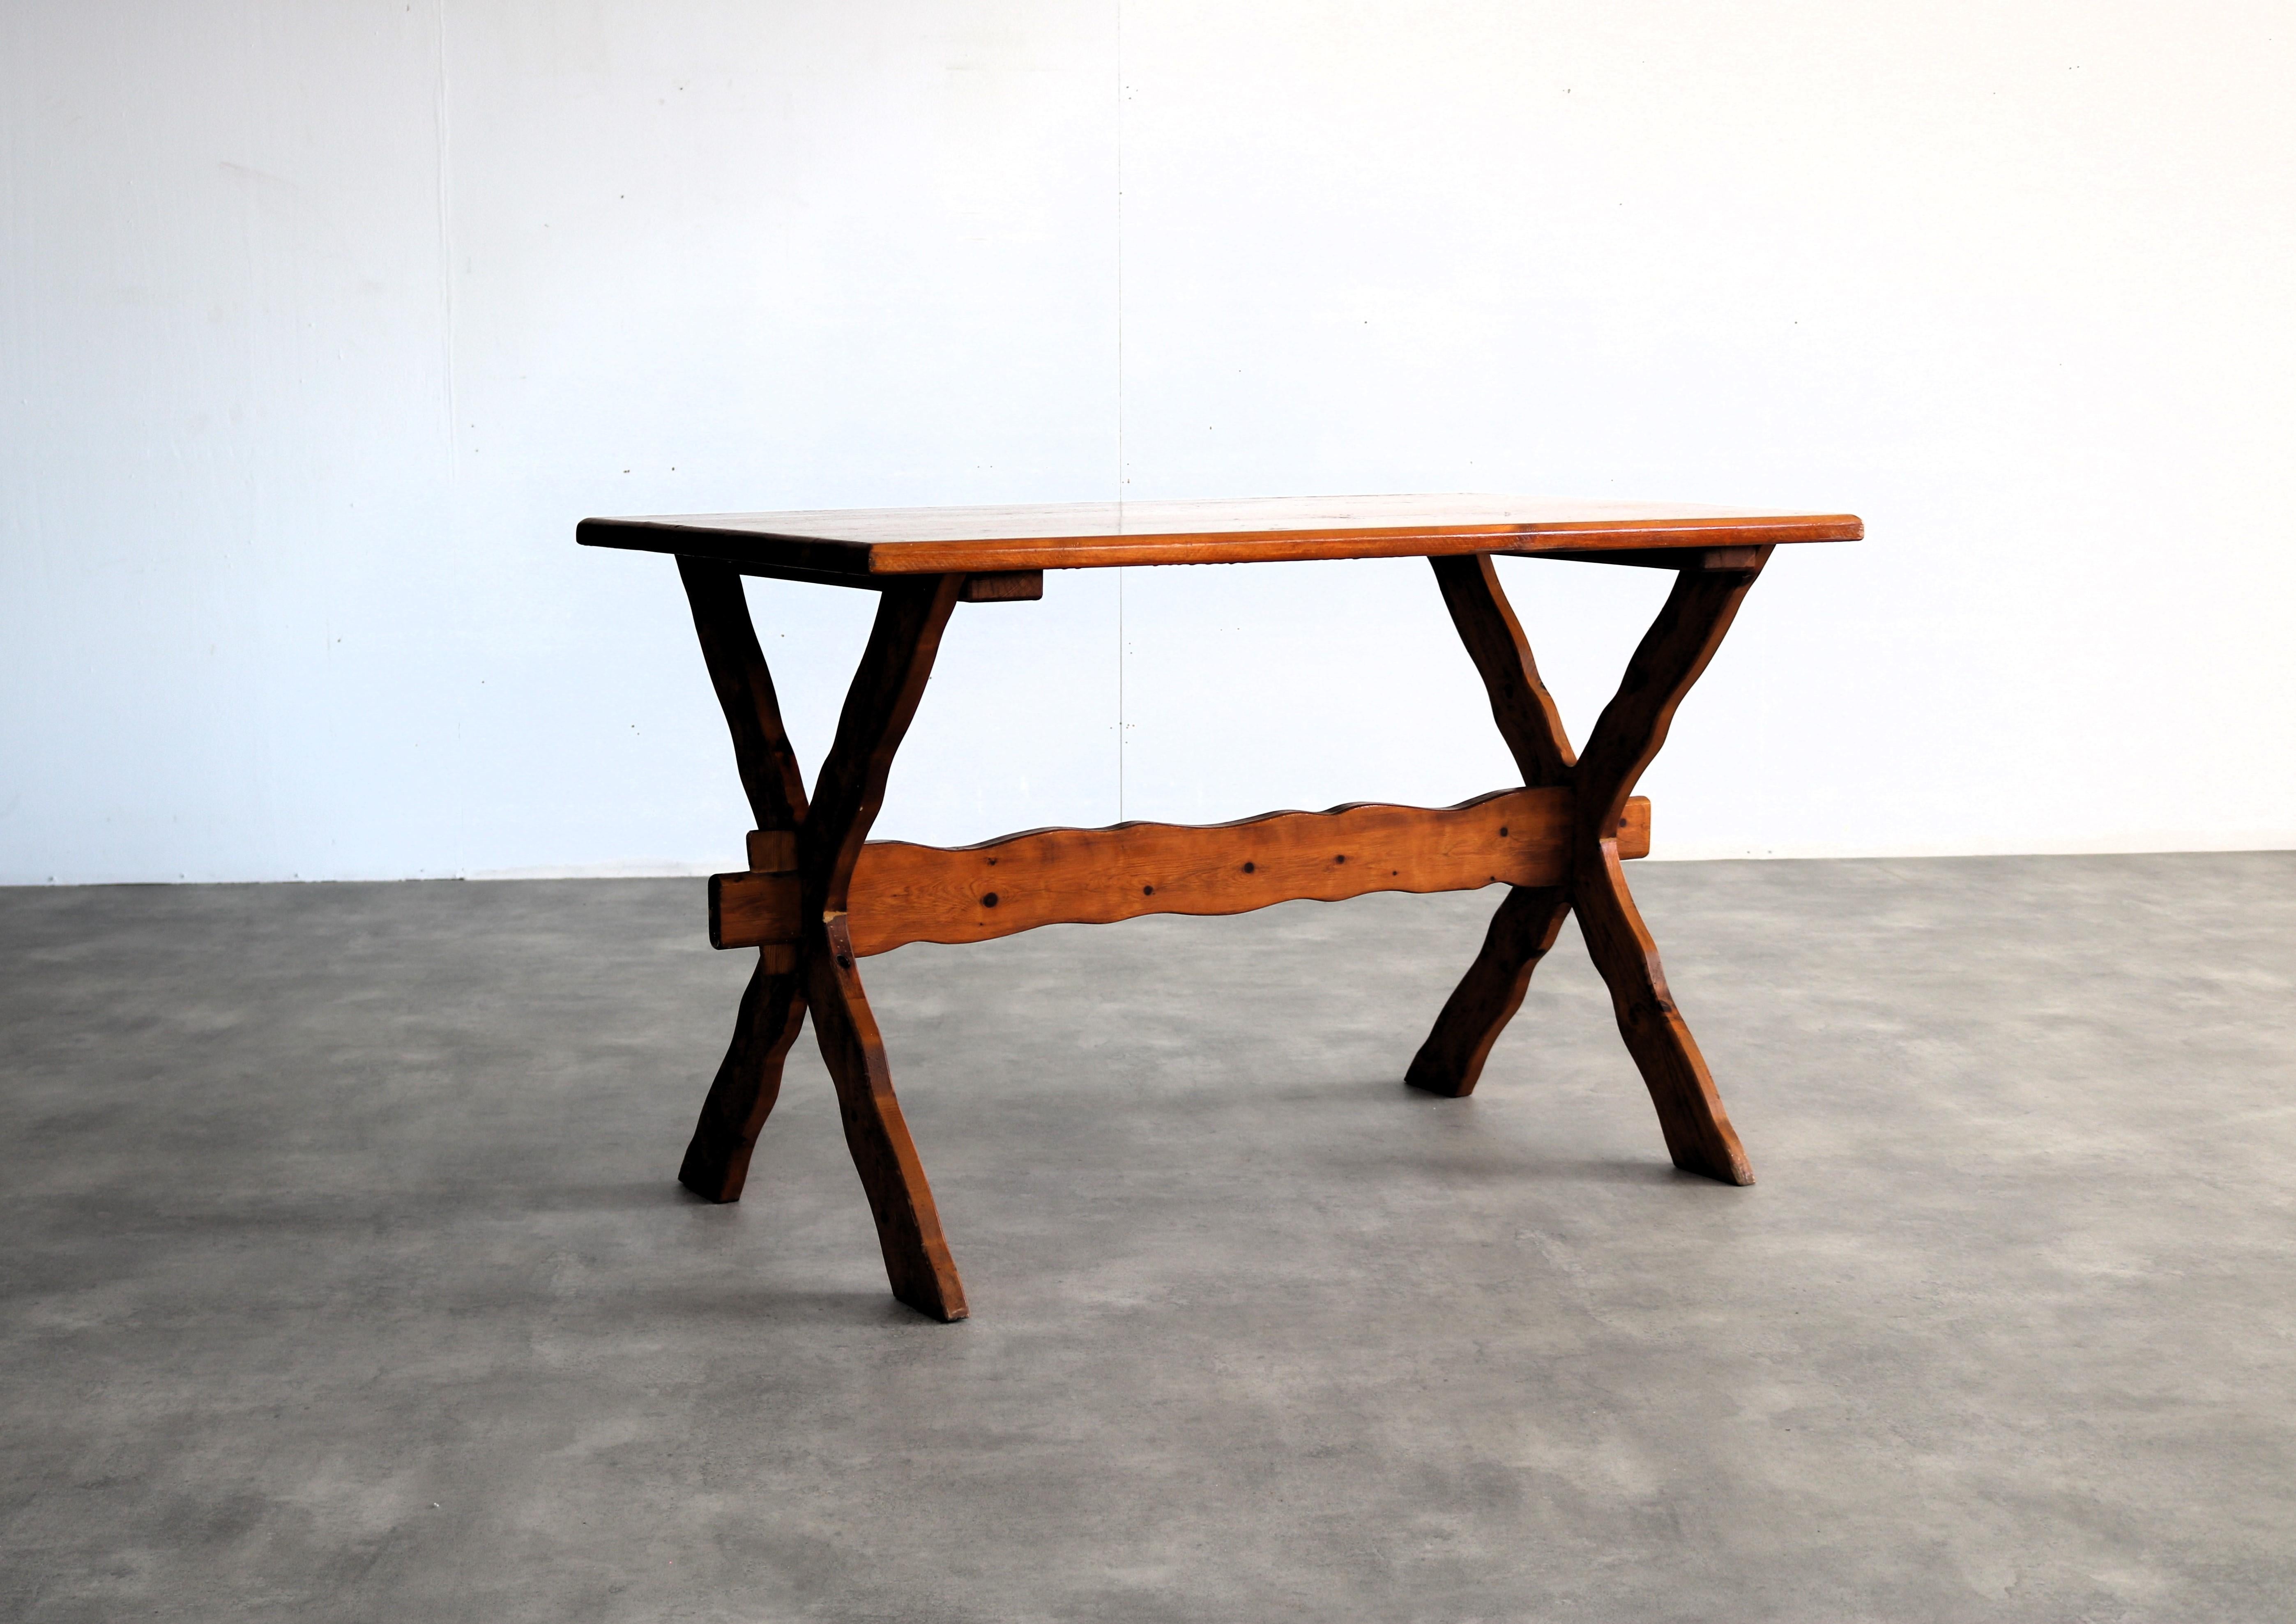 vintage dining table | brutalist table | 1950s

period | 1950s
design | unknown | Sweden
condition | good | light signs of use
size | 74.5 x 120 x 70 (hxwxd)

details | pine; can also be combined with dining room chairs;

article number | 2237